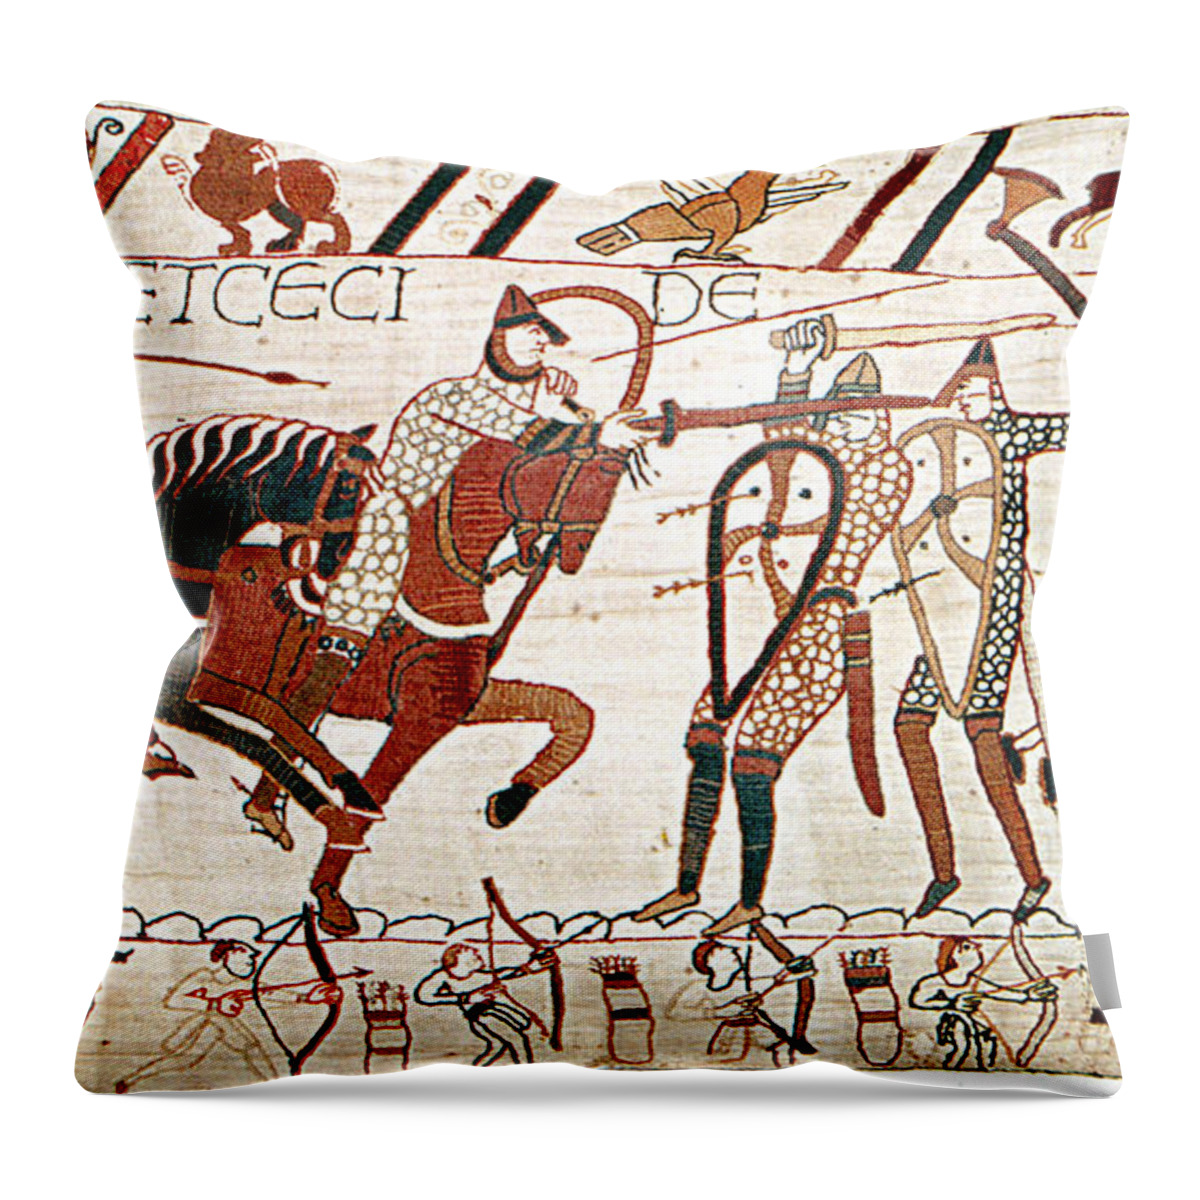 History Throw Pillow featuring the photograph Battle Of Hastings Bayeux Tapestry by Photo Researchers